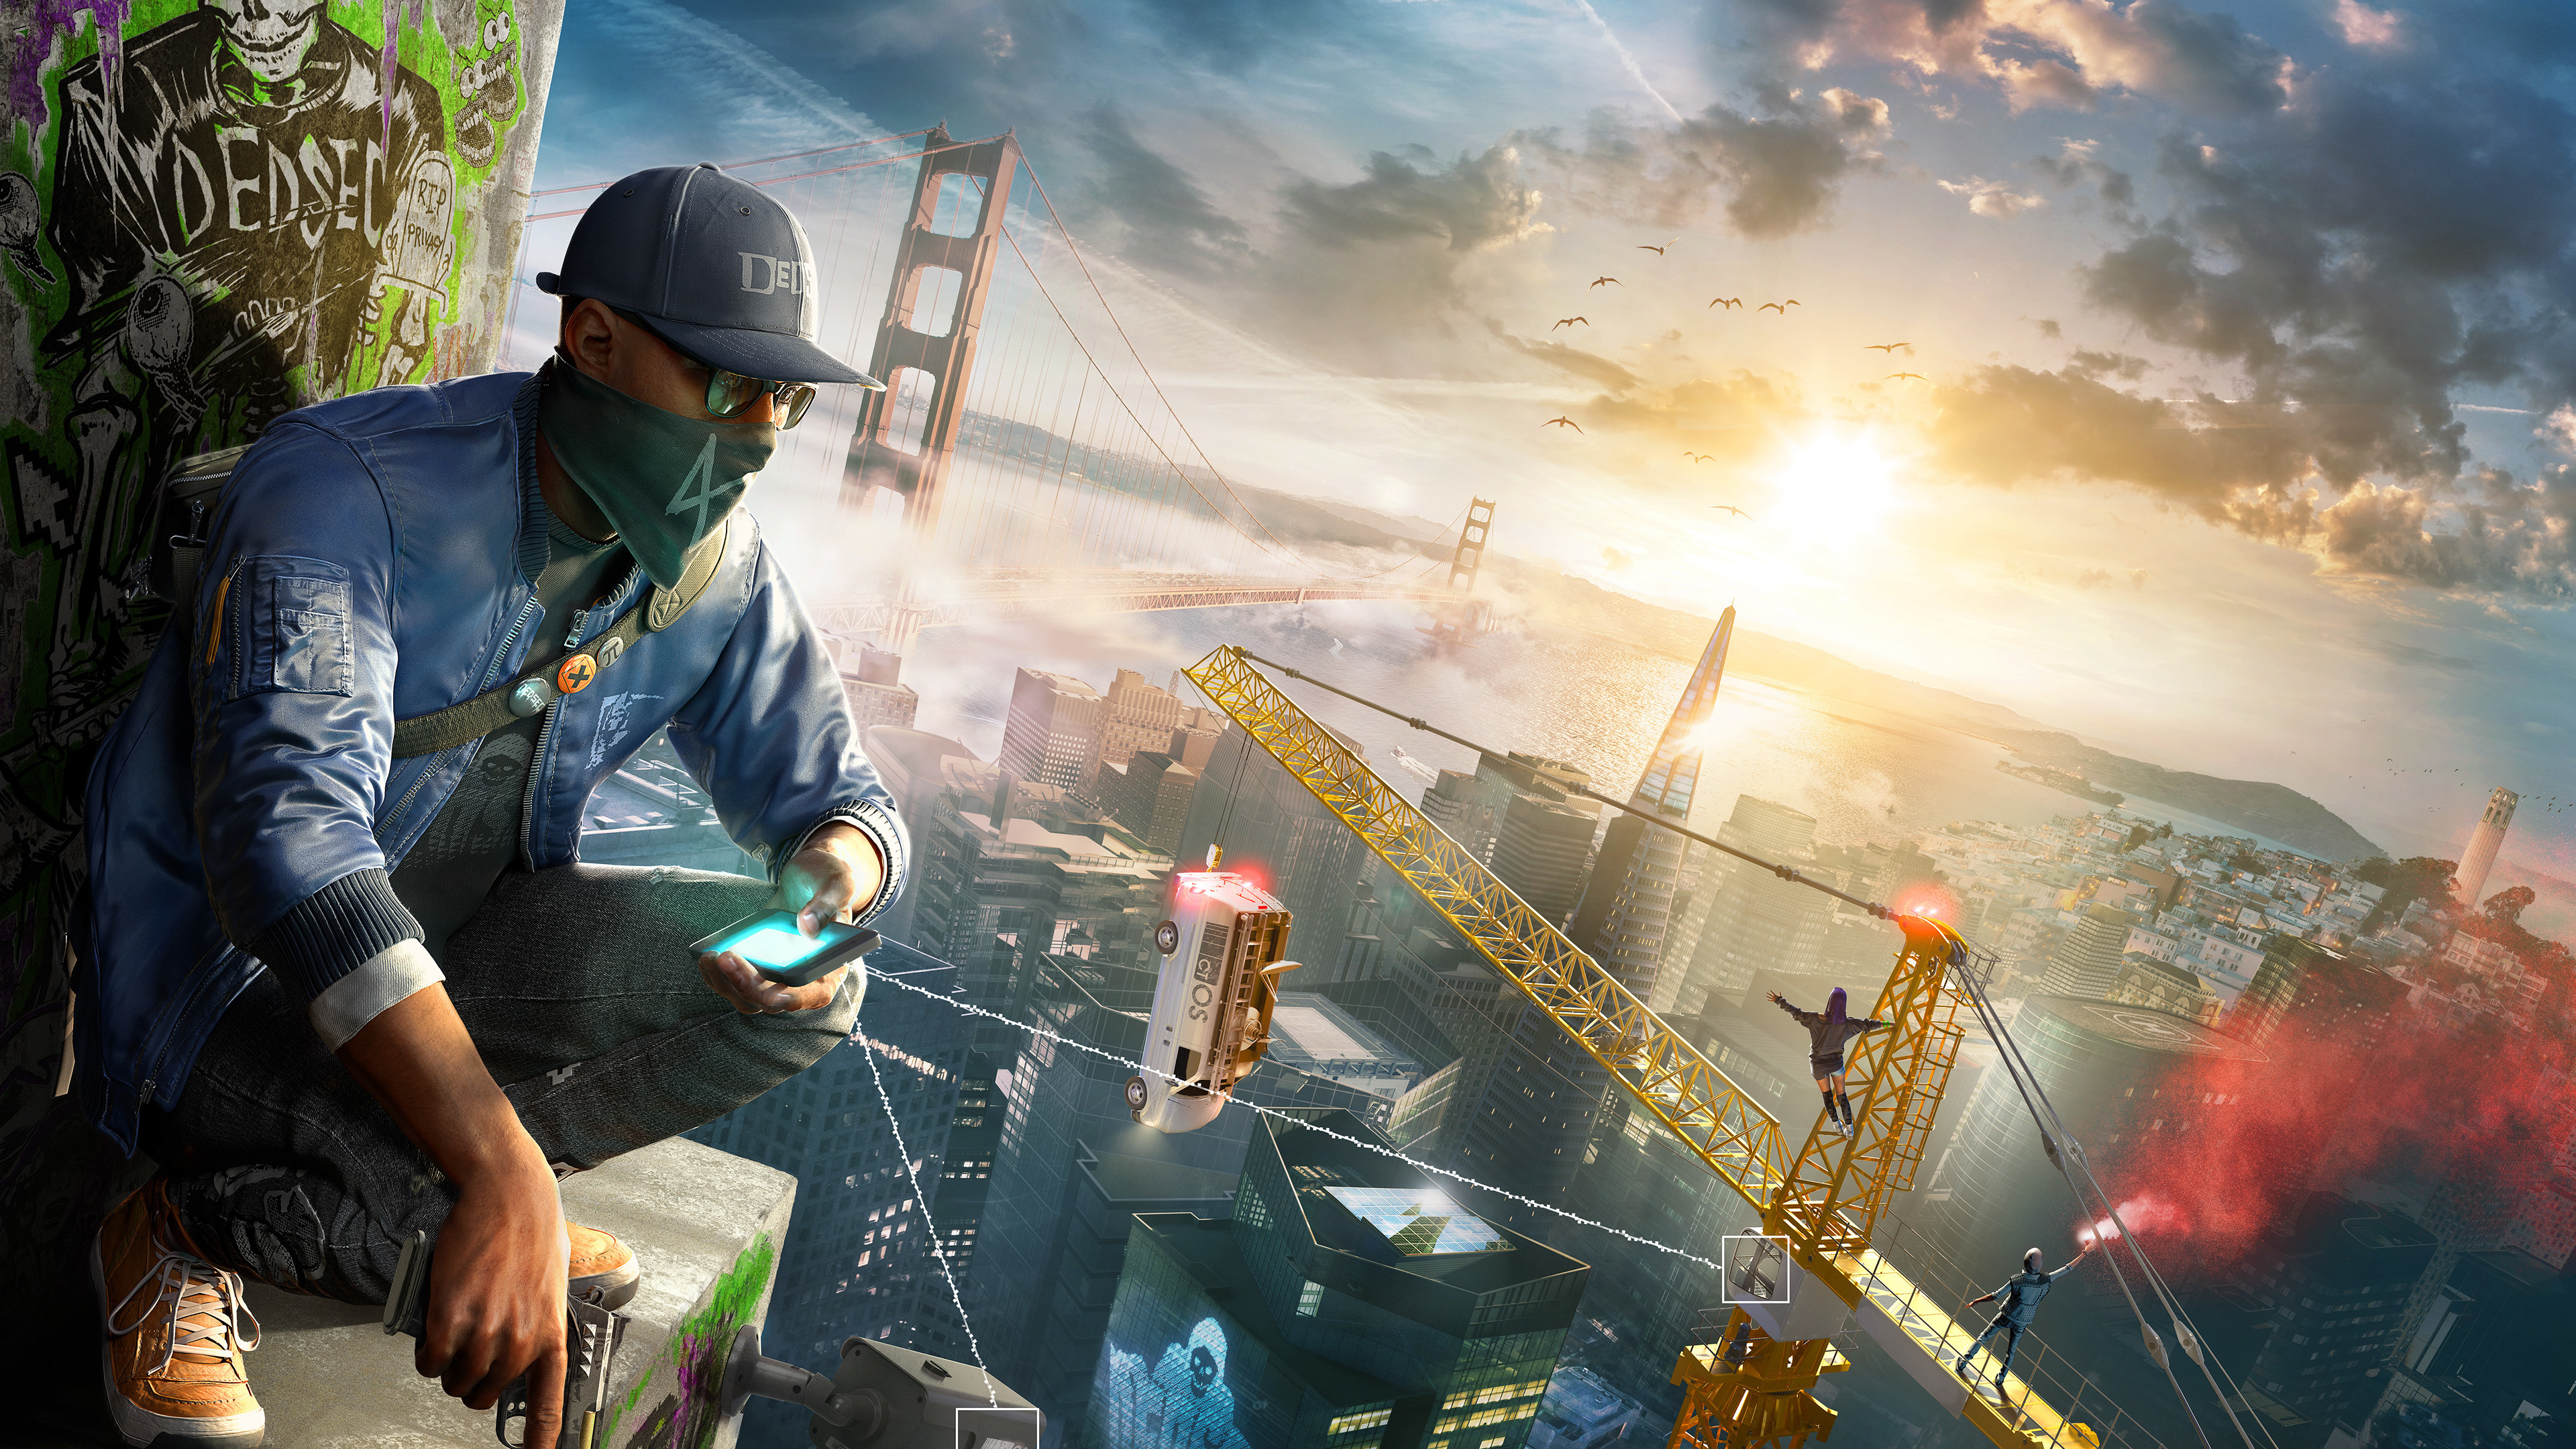 Watch Dogs 2, Watch Dogs, Ubisoft, Playstation 4, Juego de Pc. Wallpaper in 3840x2160 Resolution